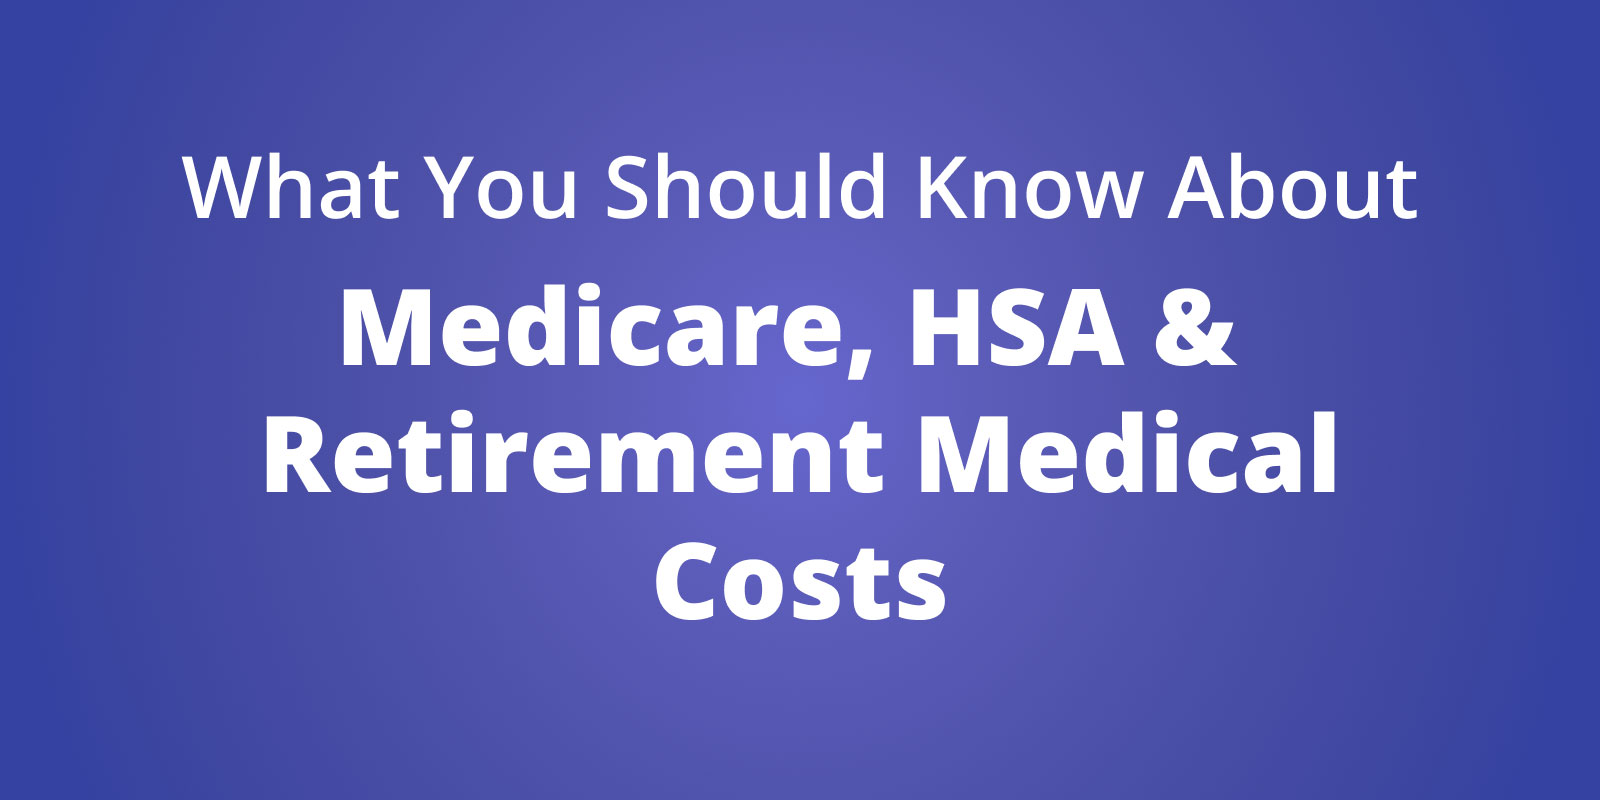 What You Should Know About Medicare, Your HSA, and Retirement Medical Costs